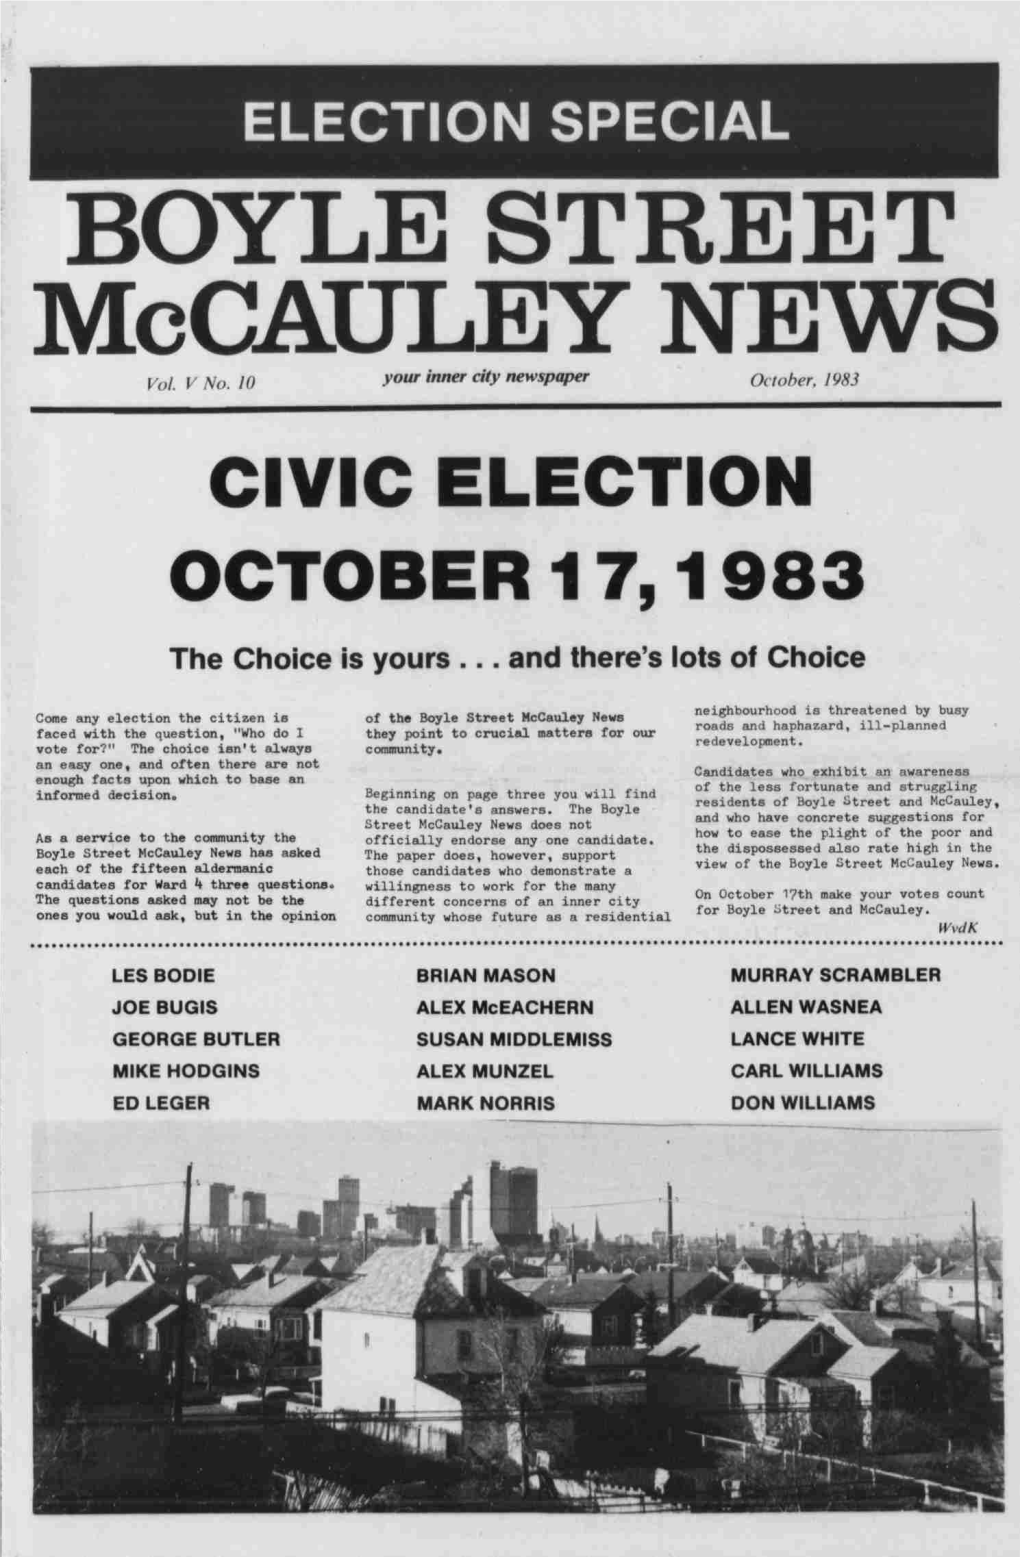 OCTOBER 1 7, 1 983 the Choice Is Yours